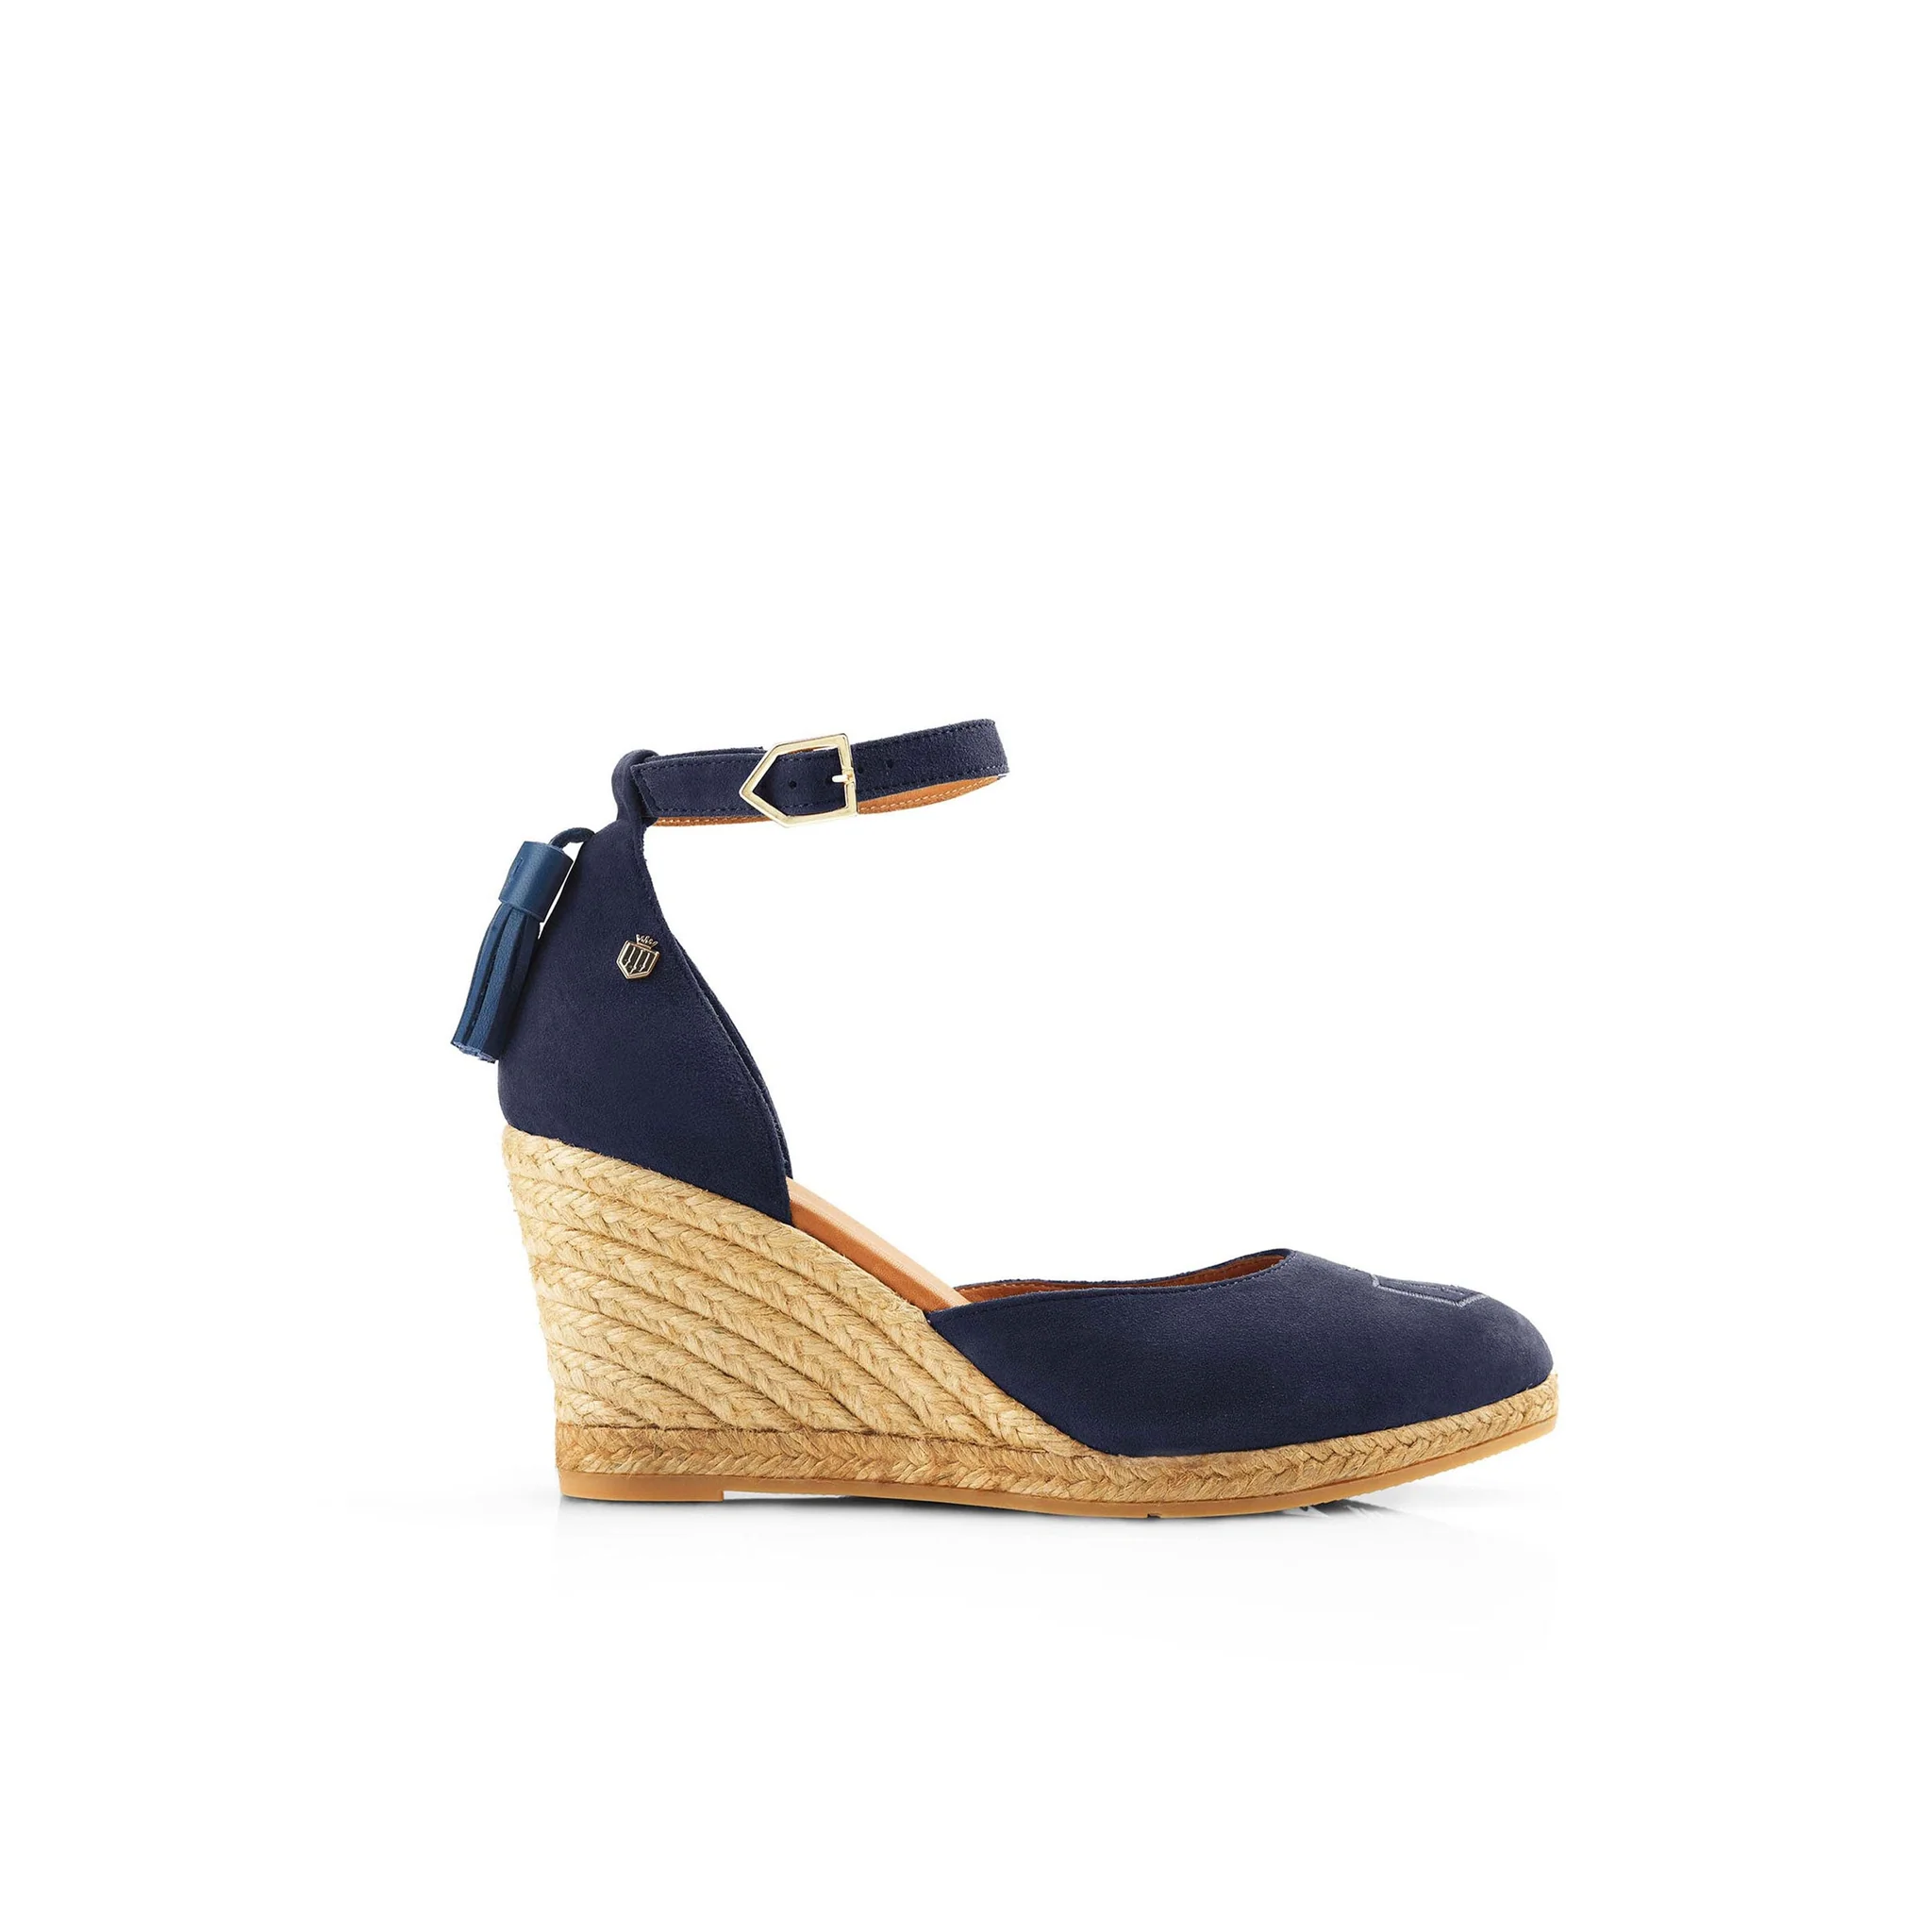 Fairfax & Favor The Monaco Wedge - Navy - Ruffords Country Store